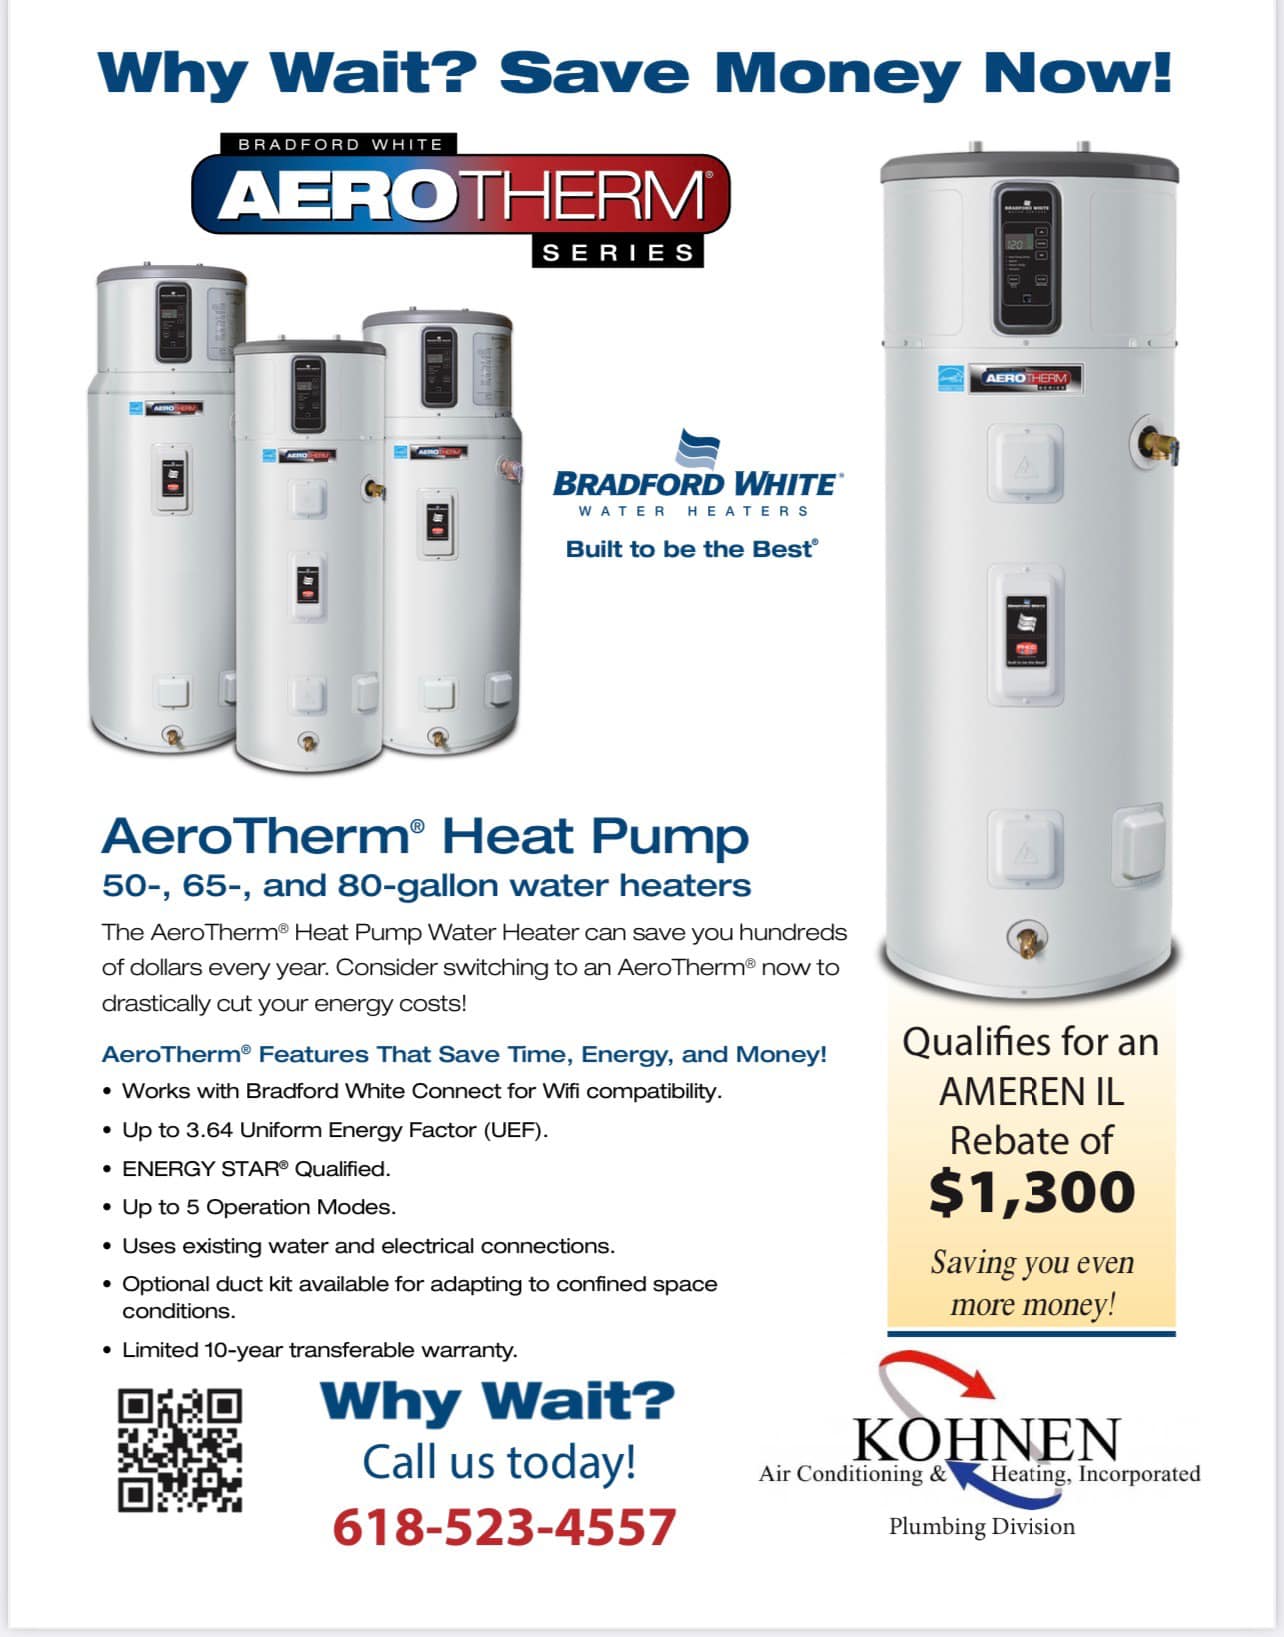 Kohnen Air Conditioning & Heating 1104 Sycamore St, Germantown Illinois 62245